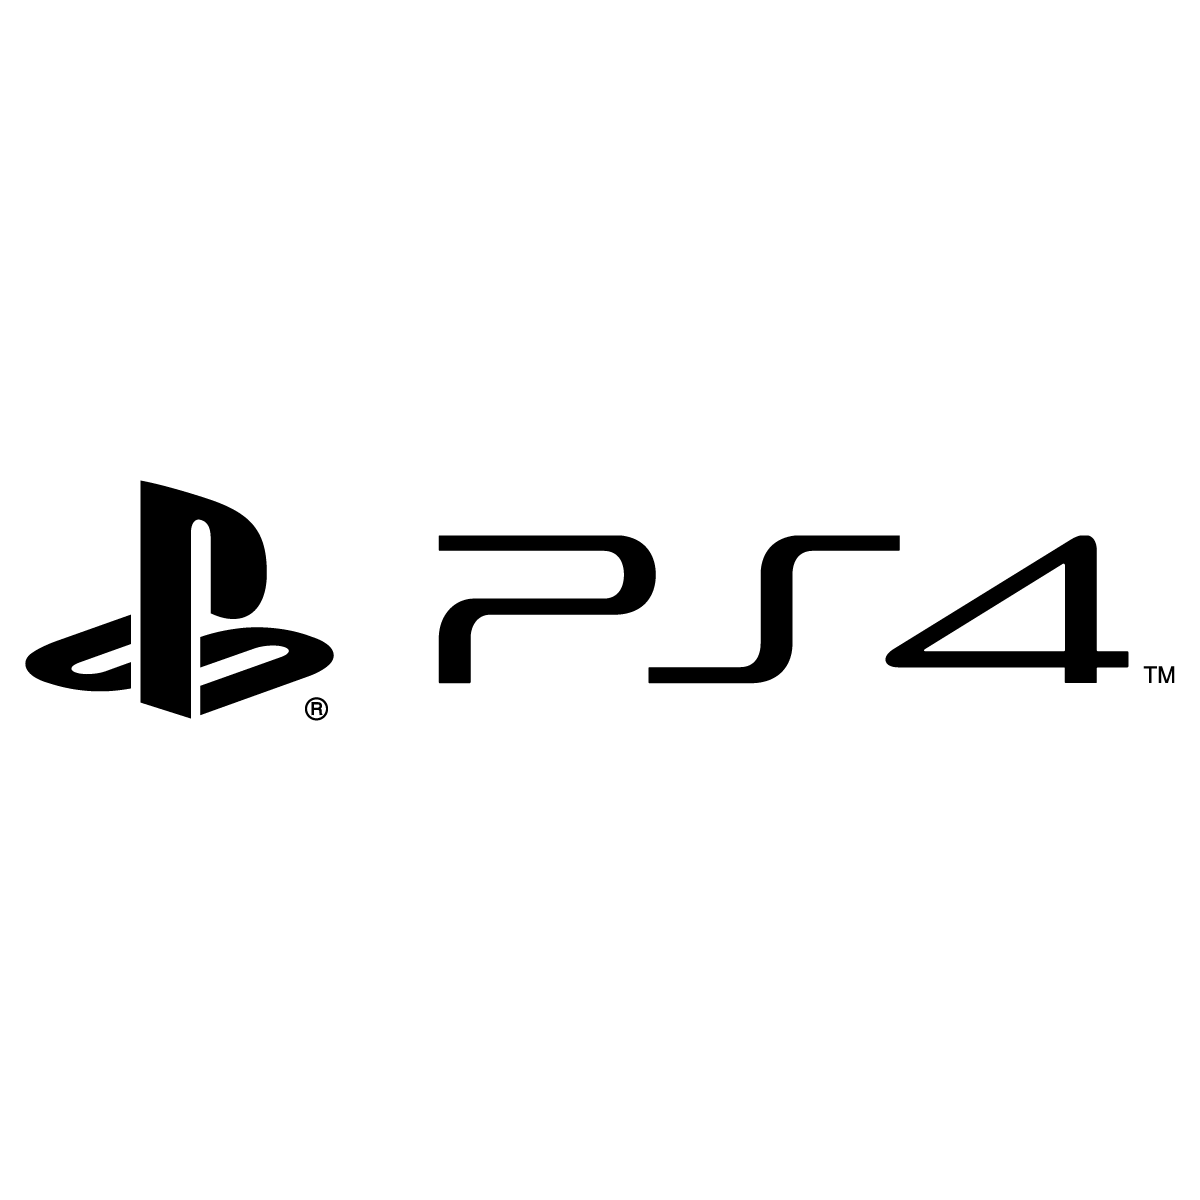 PS 4 Logo - PS4 PlayStation 4 Logo Vector | Free Vector Silhouette Graphics AI ...